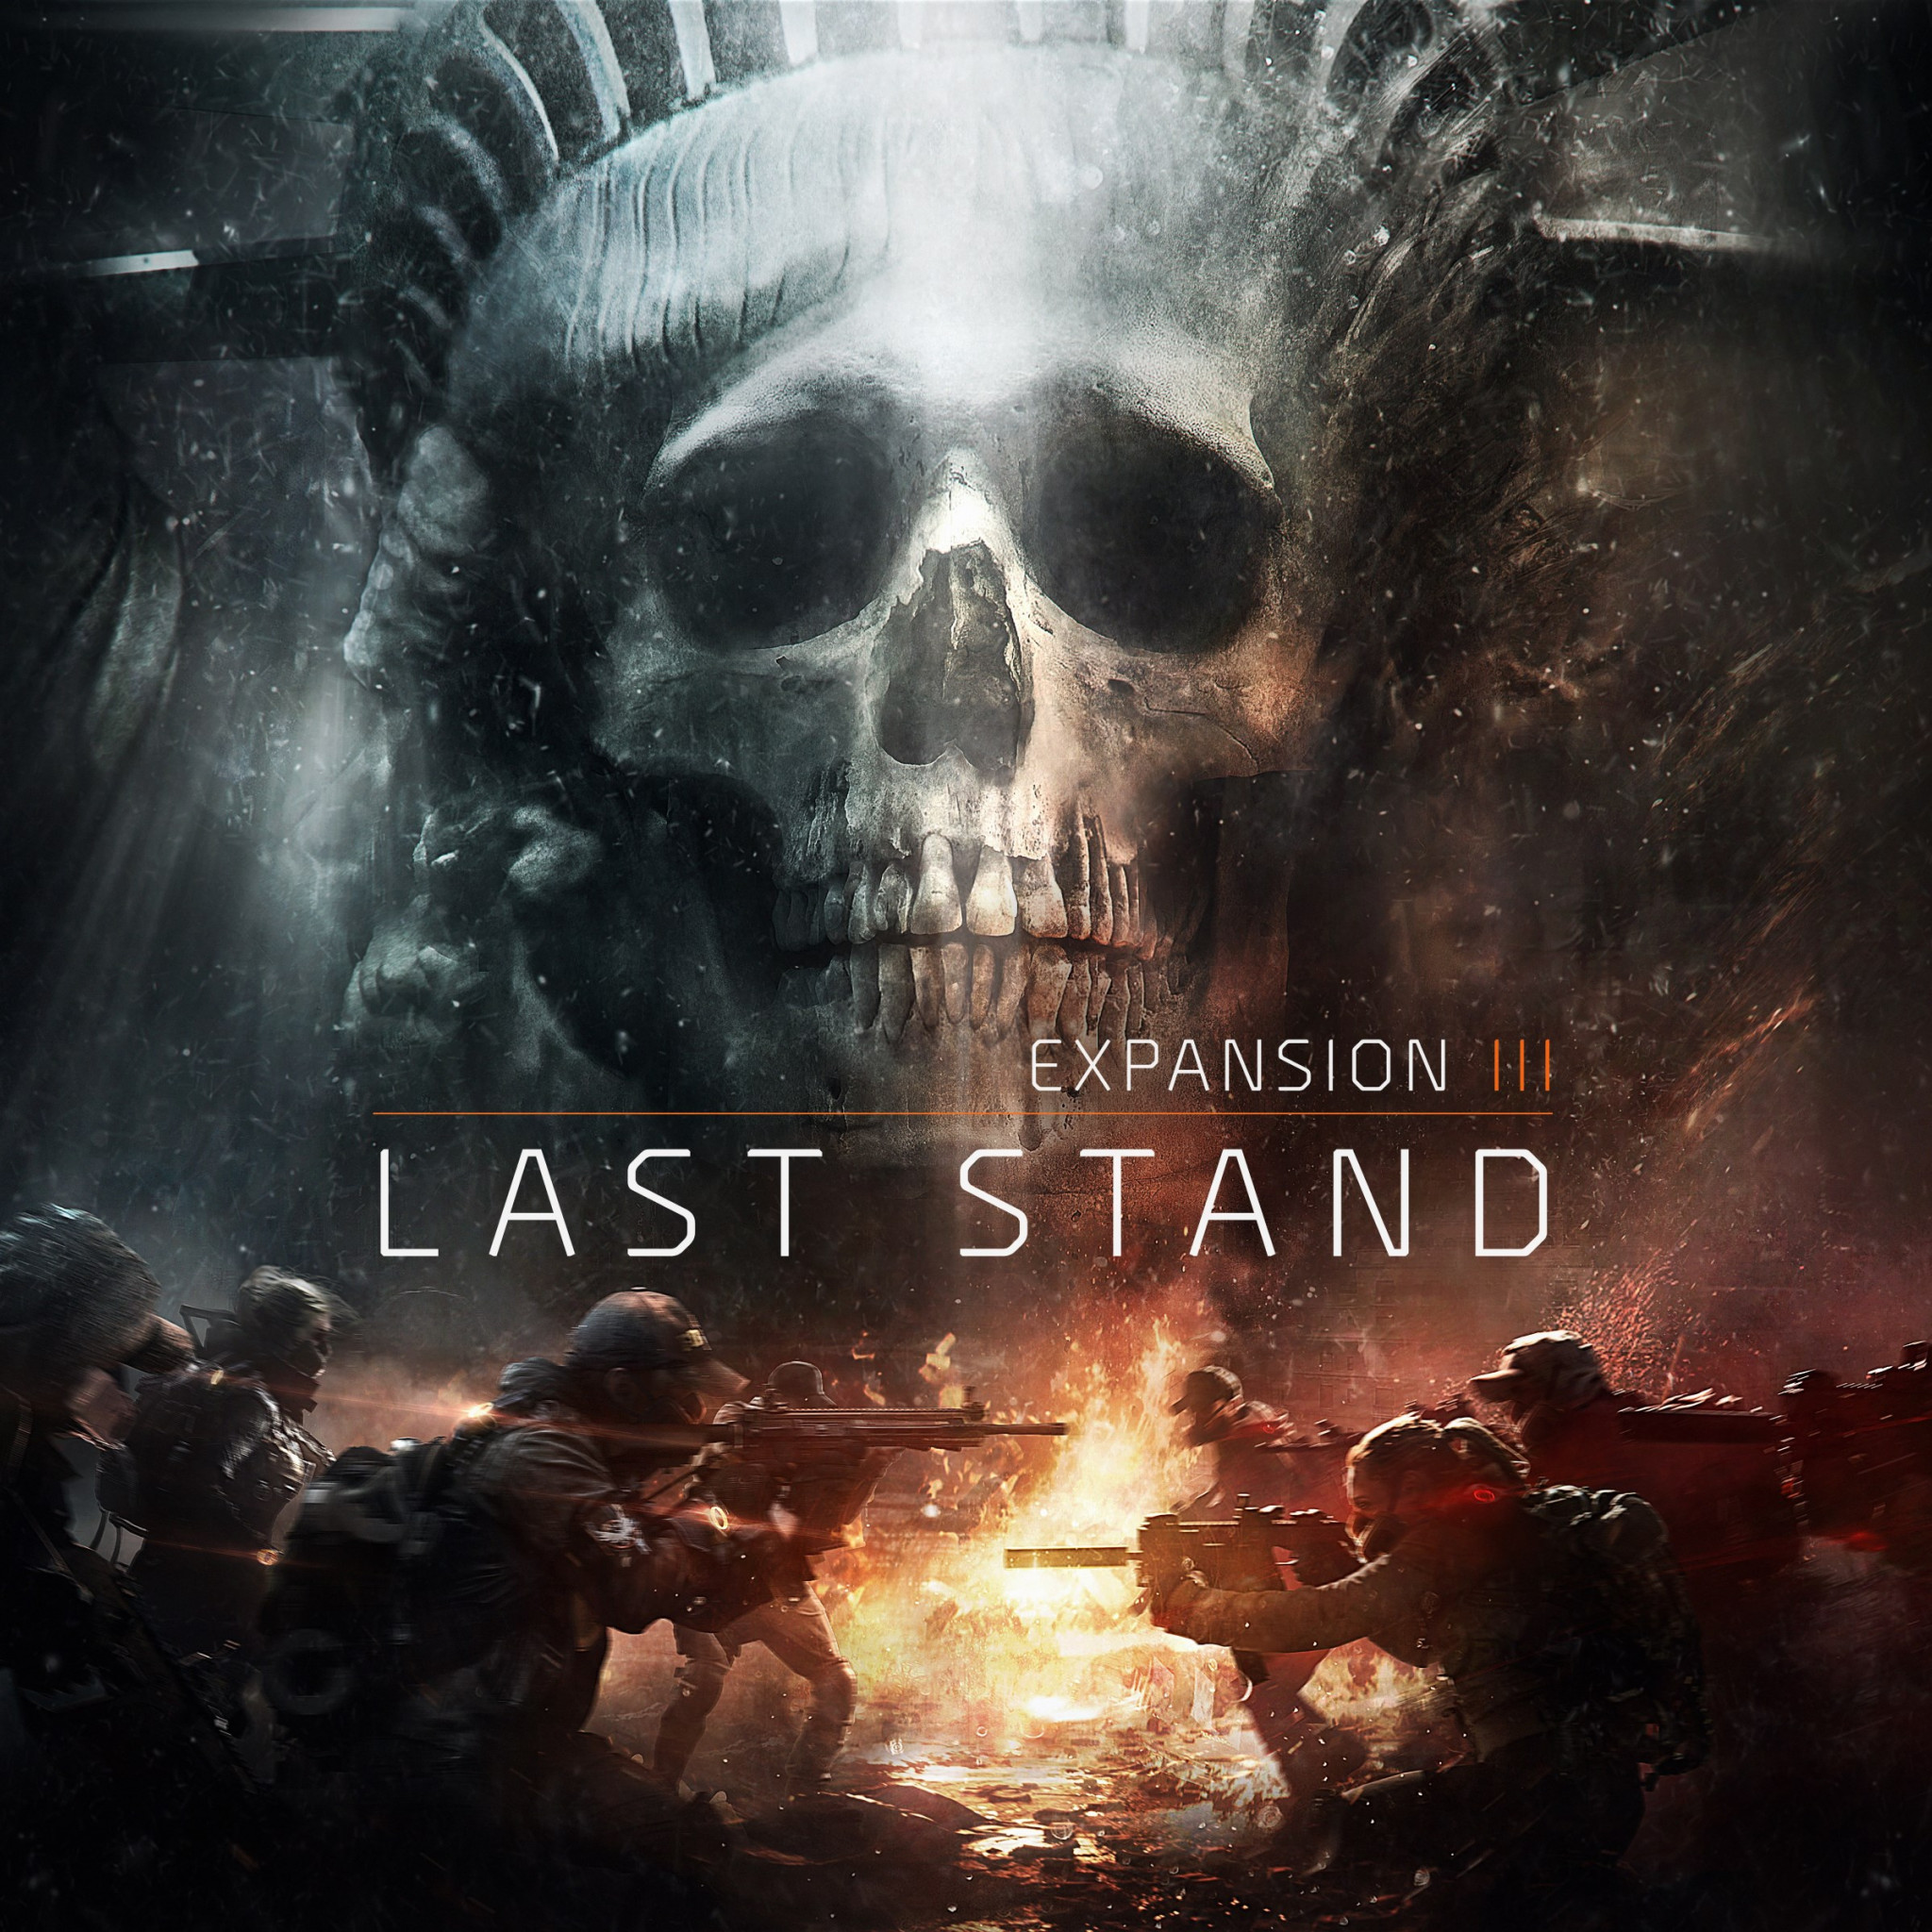 The Division Last Stand Expansion 3 wallpaper 2048x2048